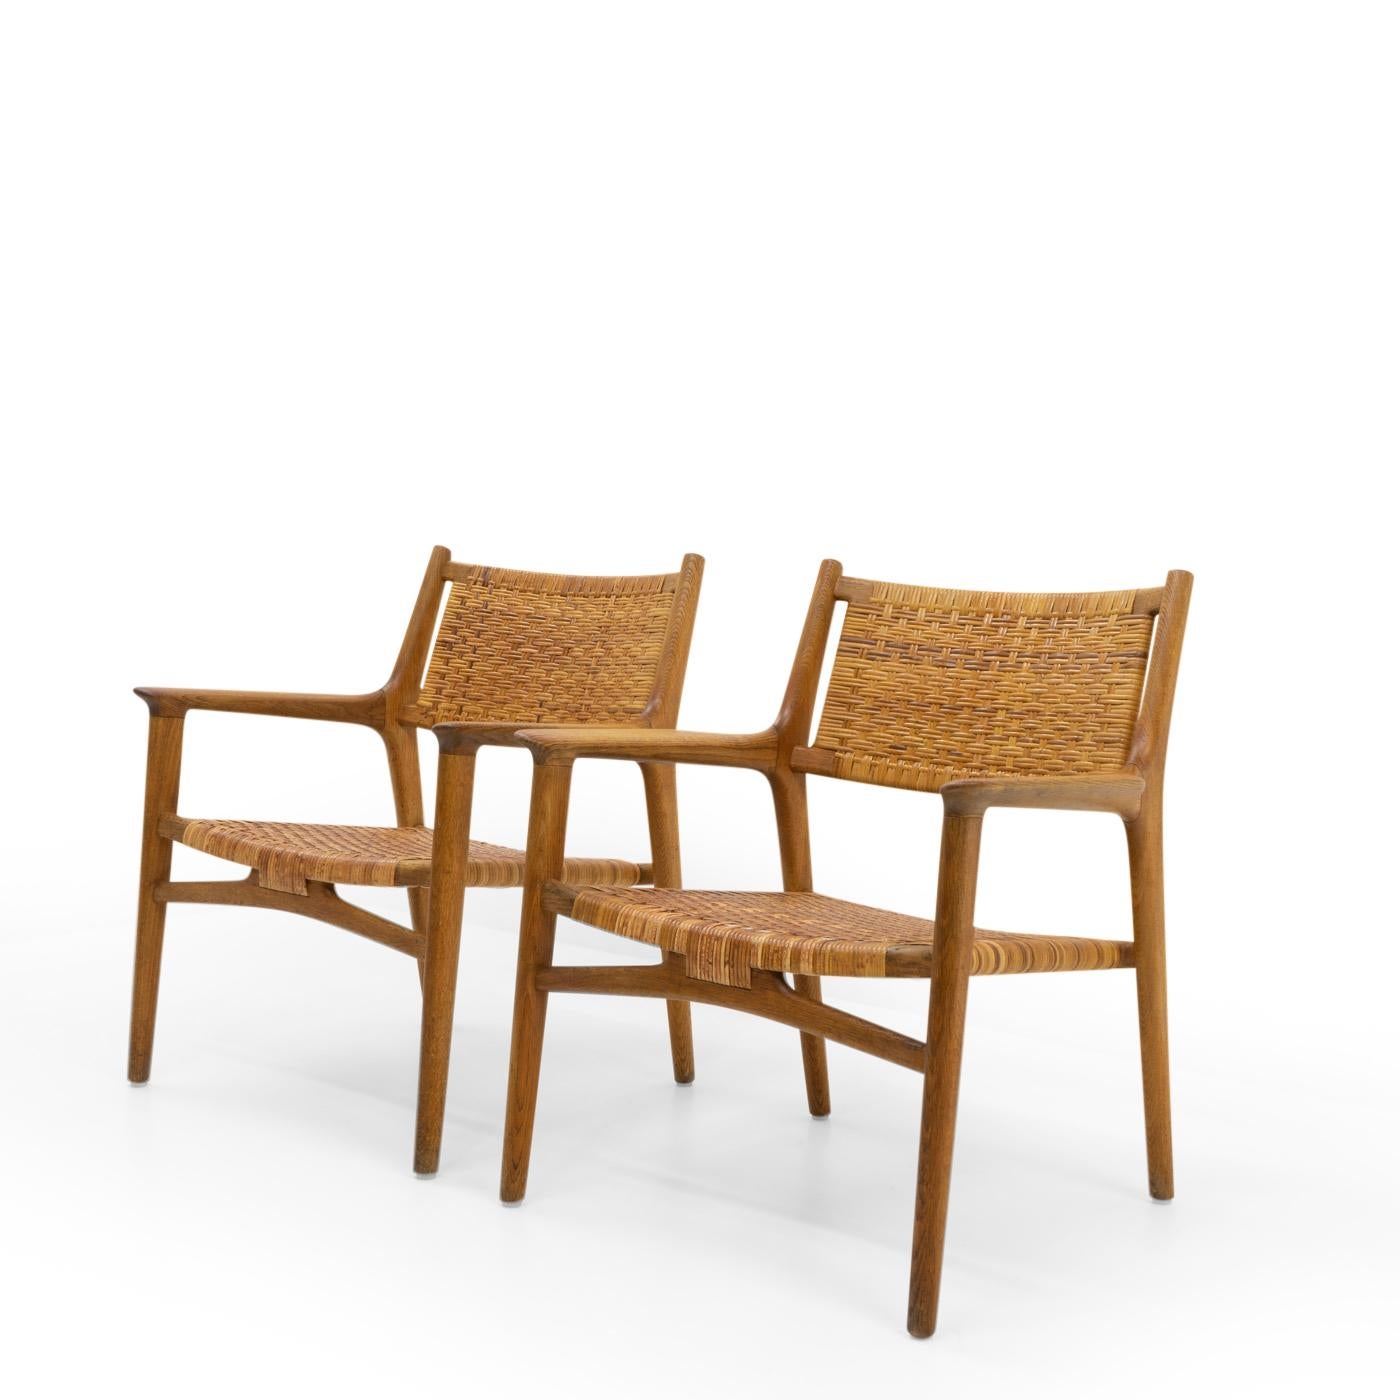 An original pair of very rare JH516 lounge chairs by Hans Wegner, produced by Johannes Hansen during the 1950s. 

A rare opportunity to purchase an investment piece that rarely becomes available on the market.


 
Materials: Oak, cane 

Origination: